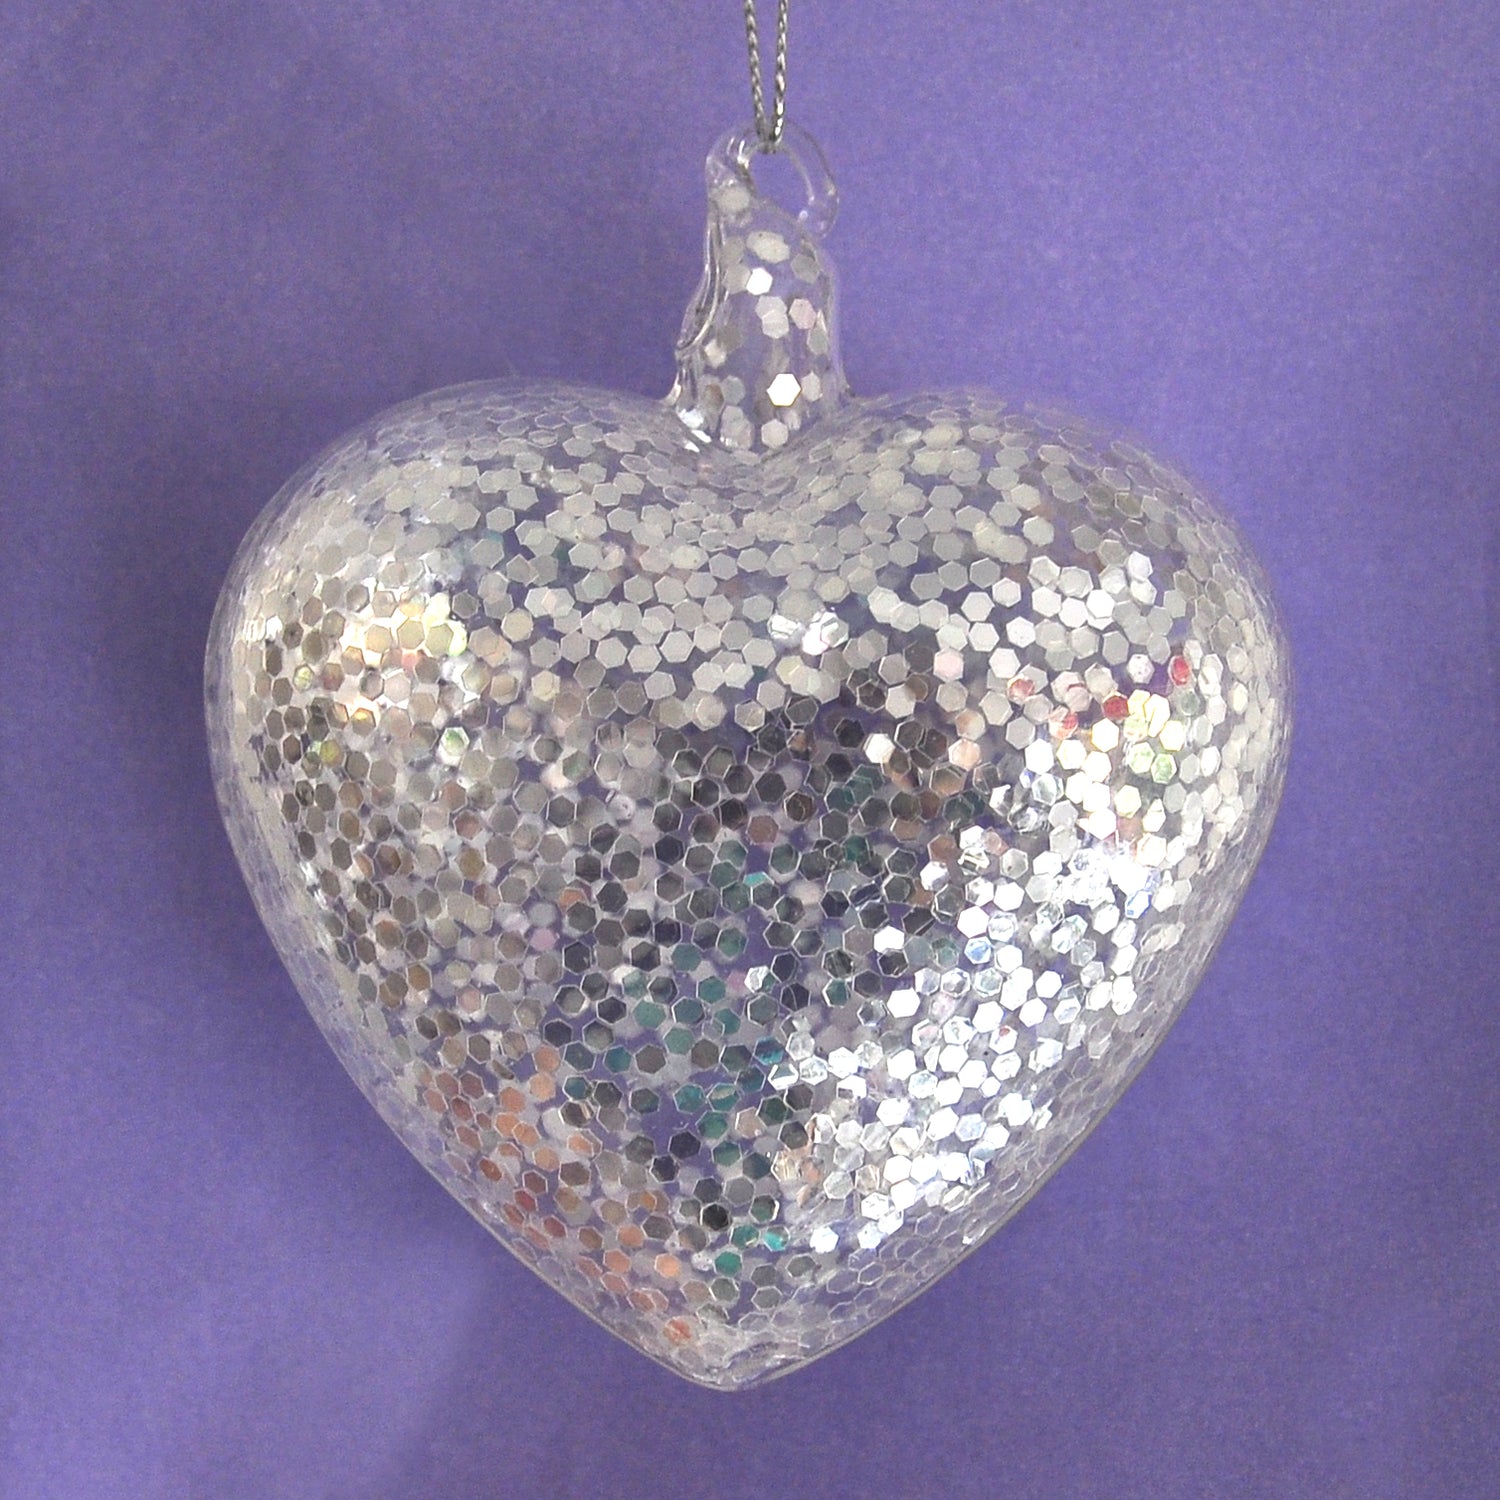 Silver Glitter Heart Glass Christmas Decoration for hanging on the Christmas tree